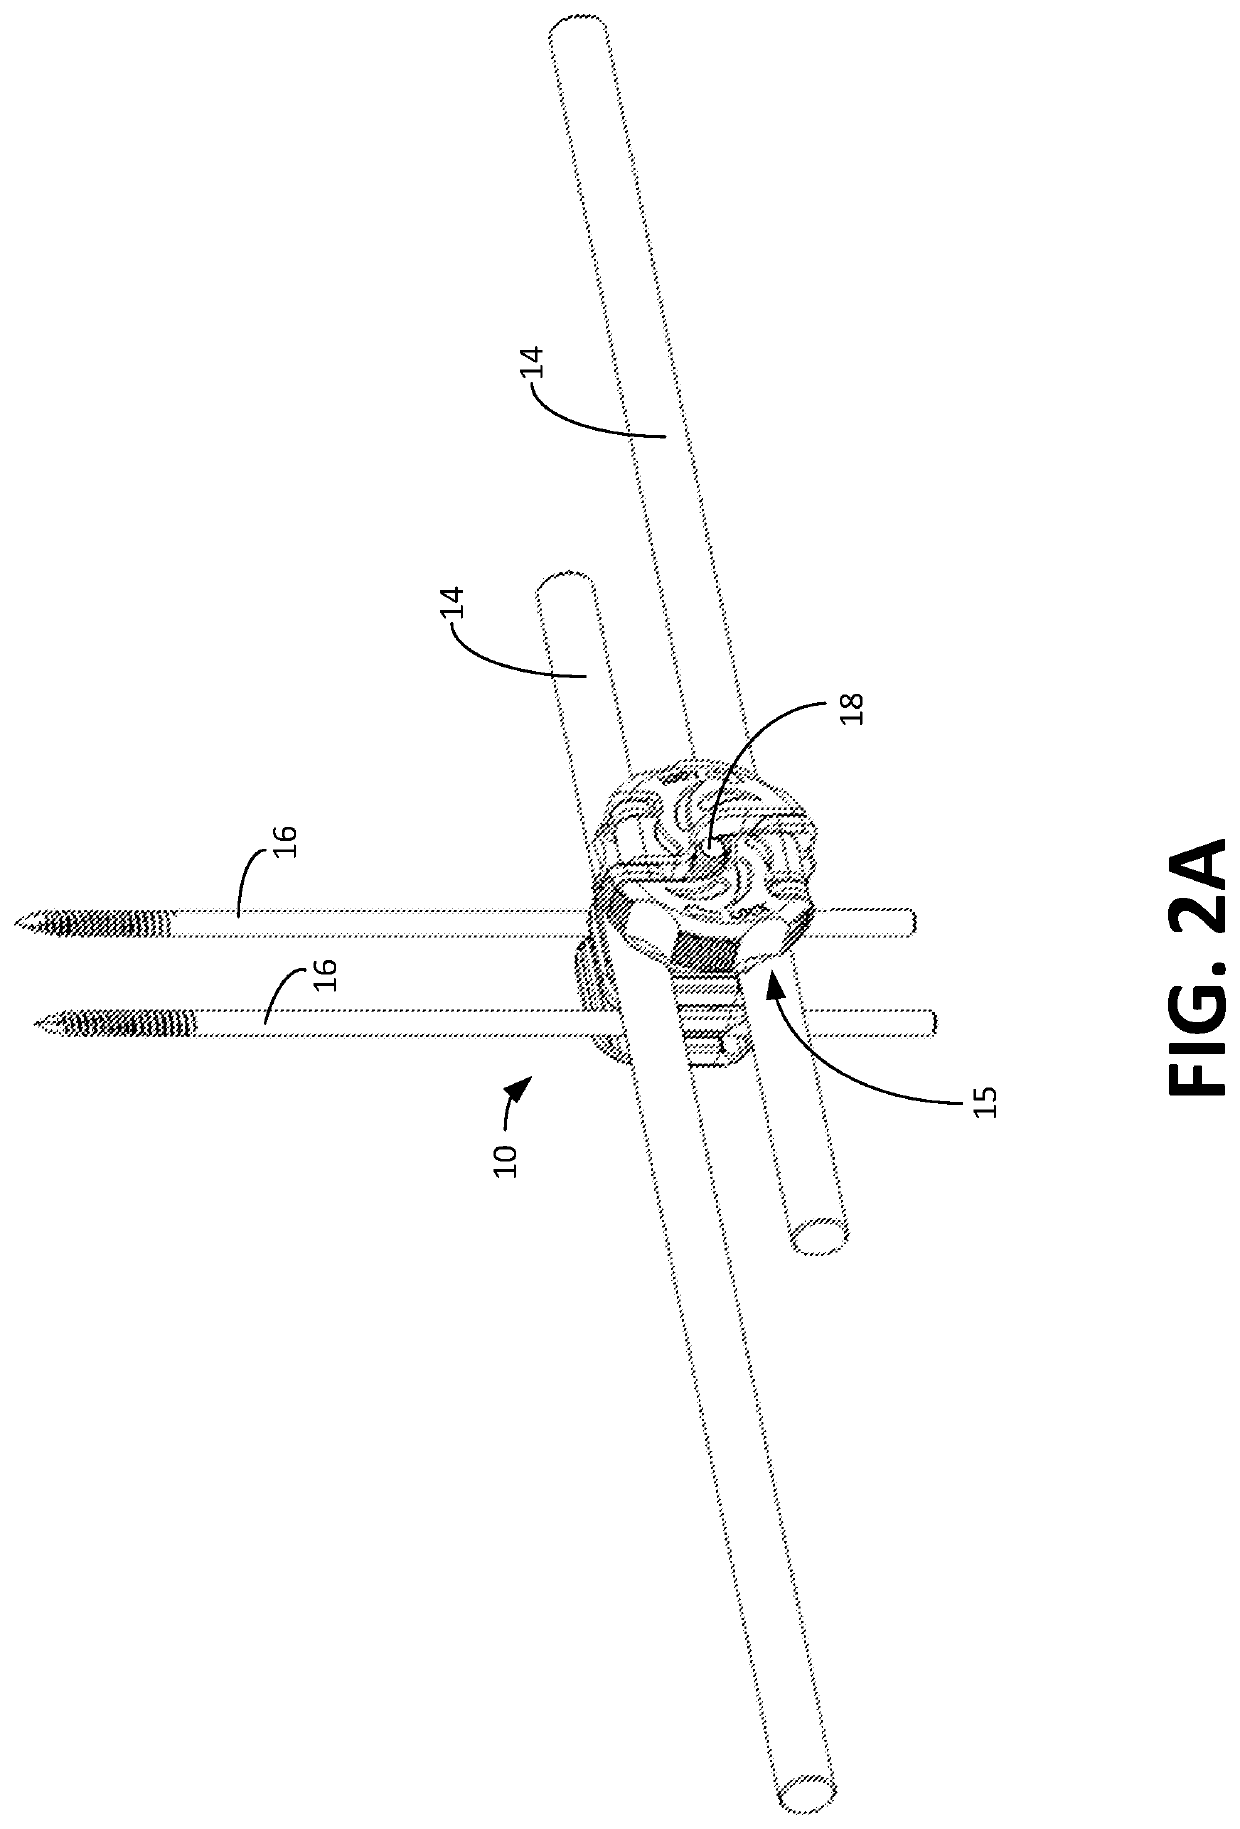 Universal clamp apparatus for bone fixation device